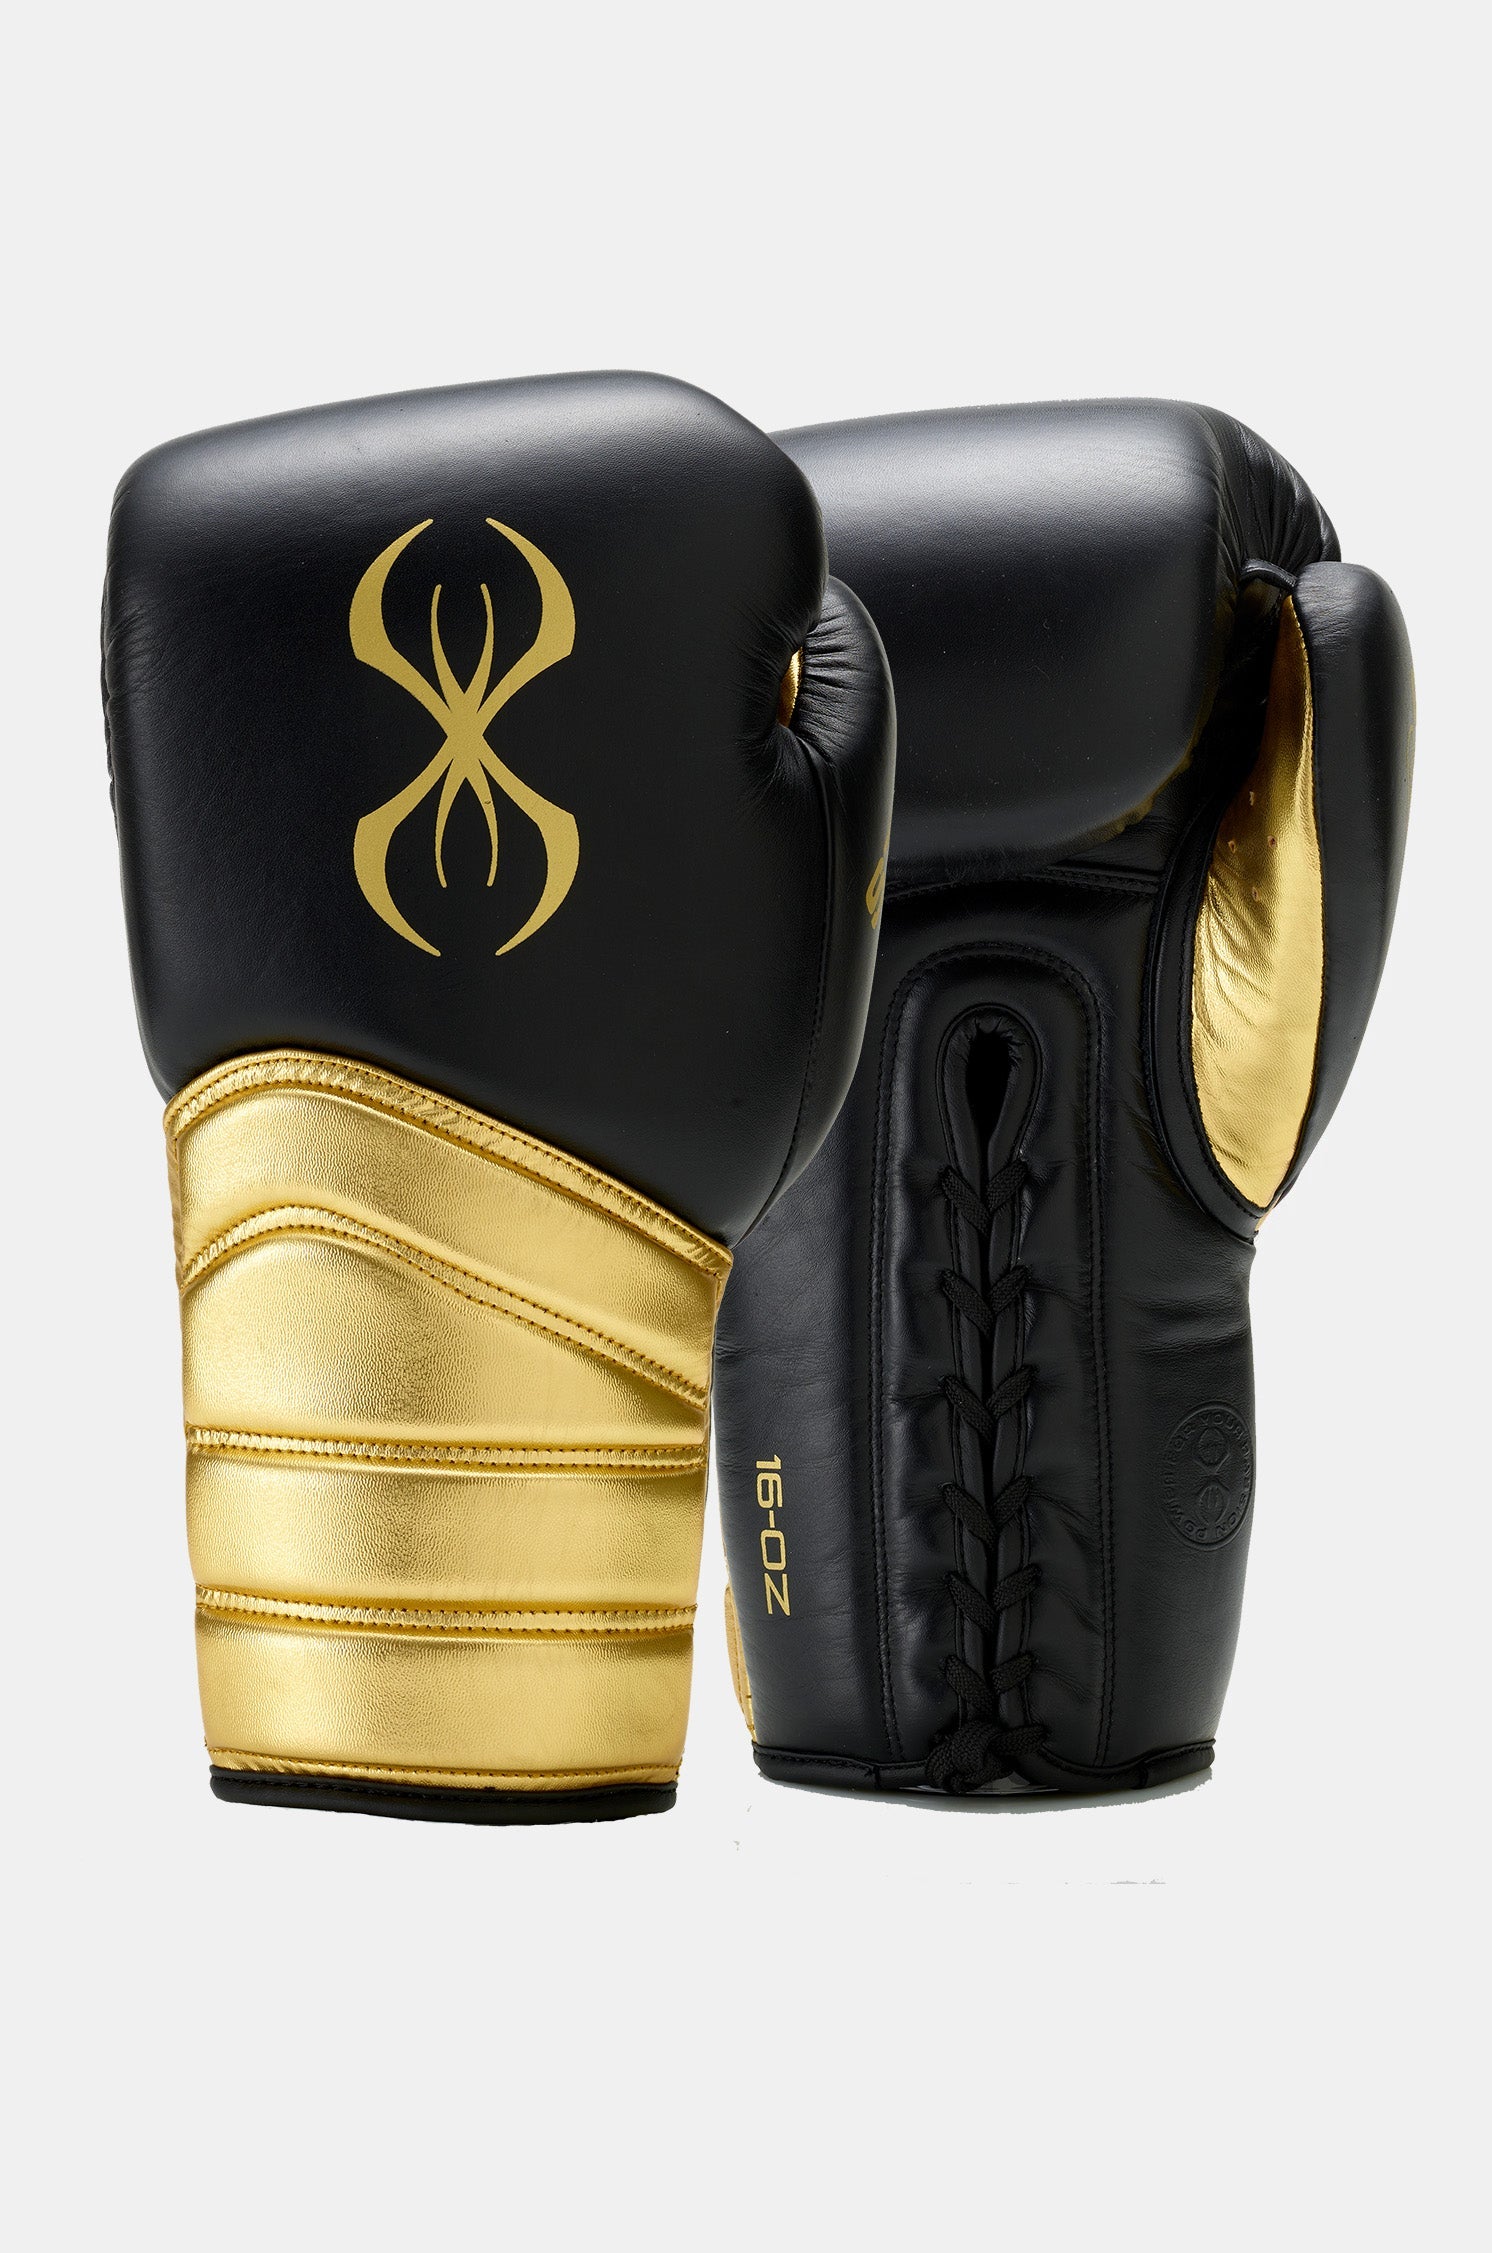 STING Viper X Sparring Gloves Lace Black Gold